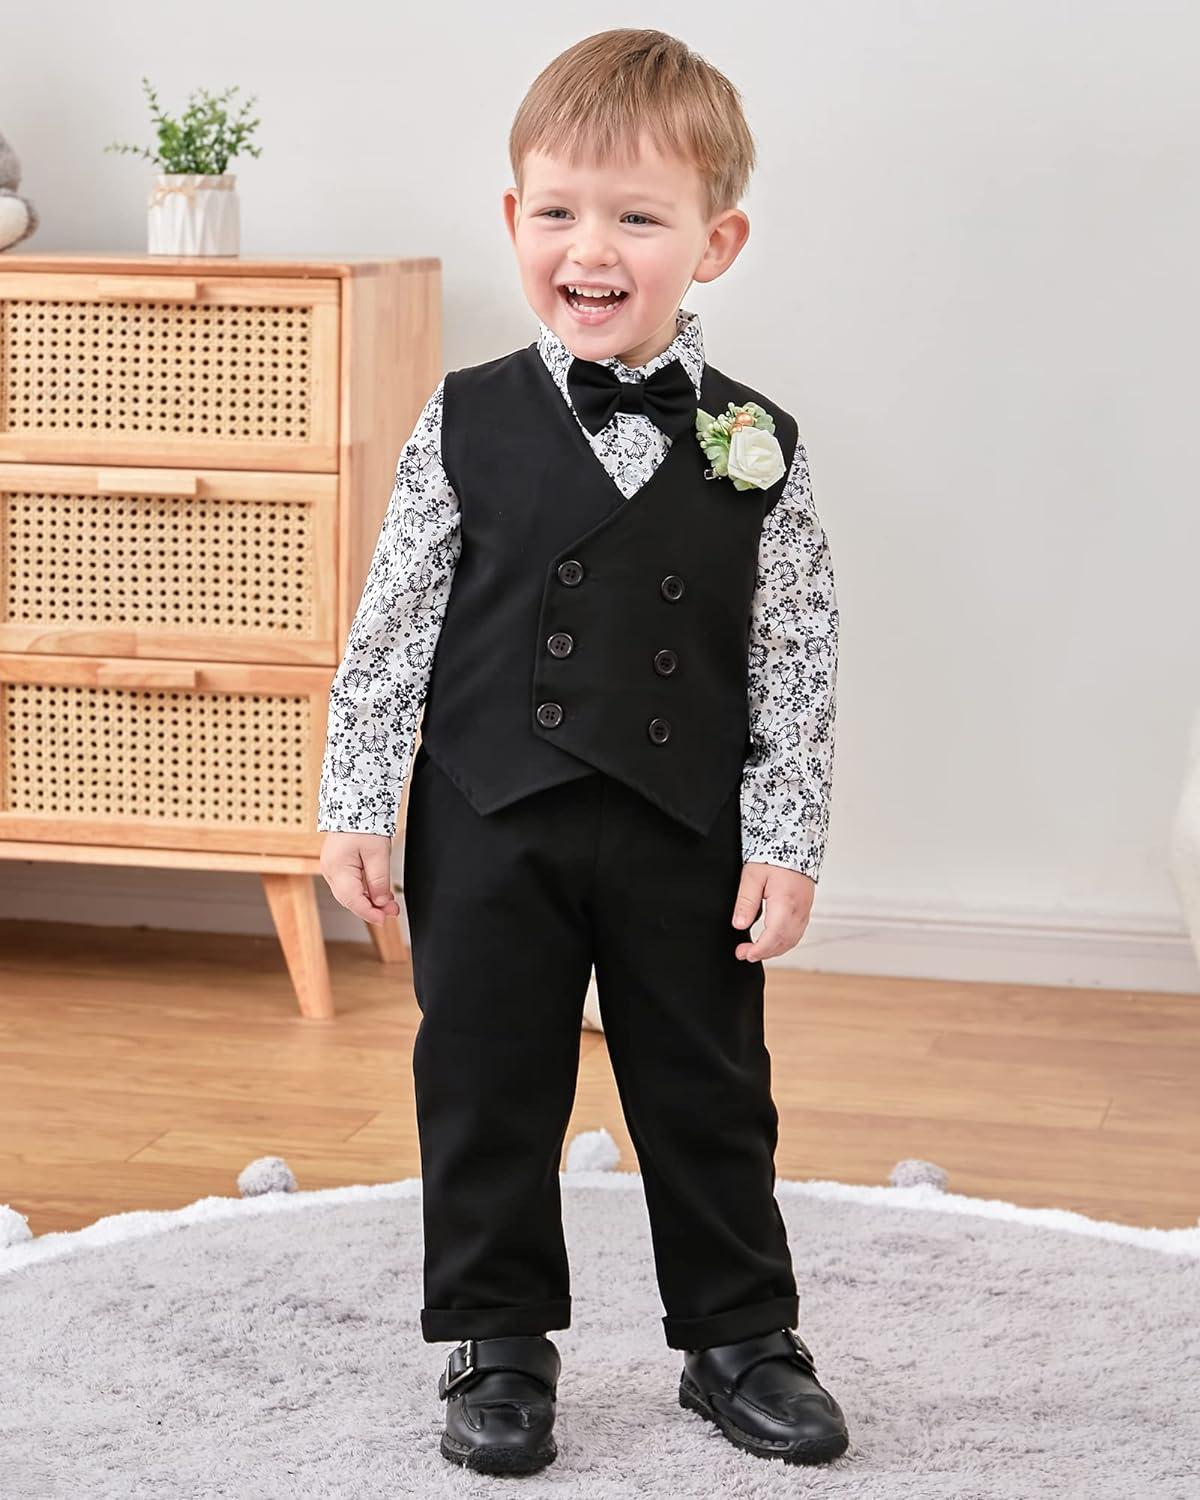 ZOEREA Baby Boy Gentleman Clothes Sets 1-5 Years Infant Wedding Tuxedo  Outfits Long Sleeve Formal Shirt+Suspender Pants+Vest+Bowtie+Boutonniere 3-4  Years Black